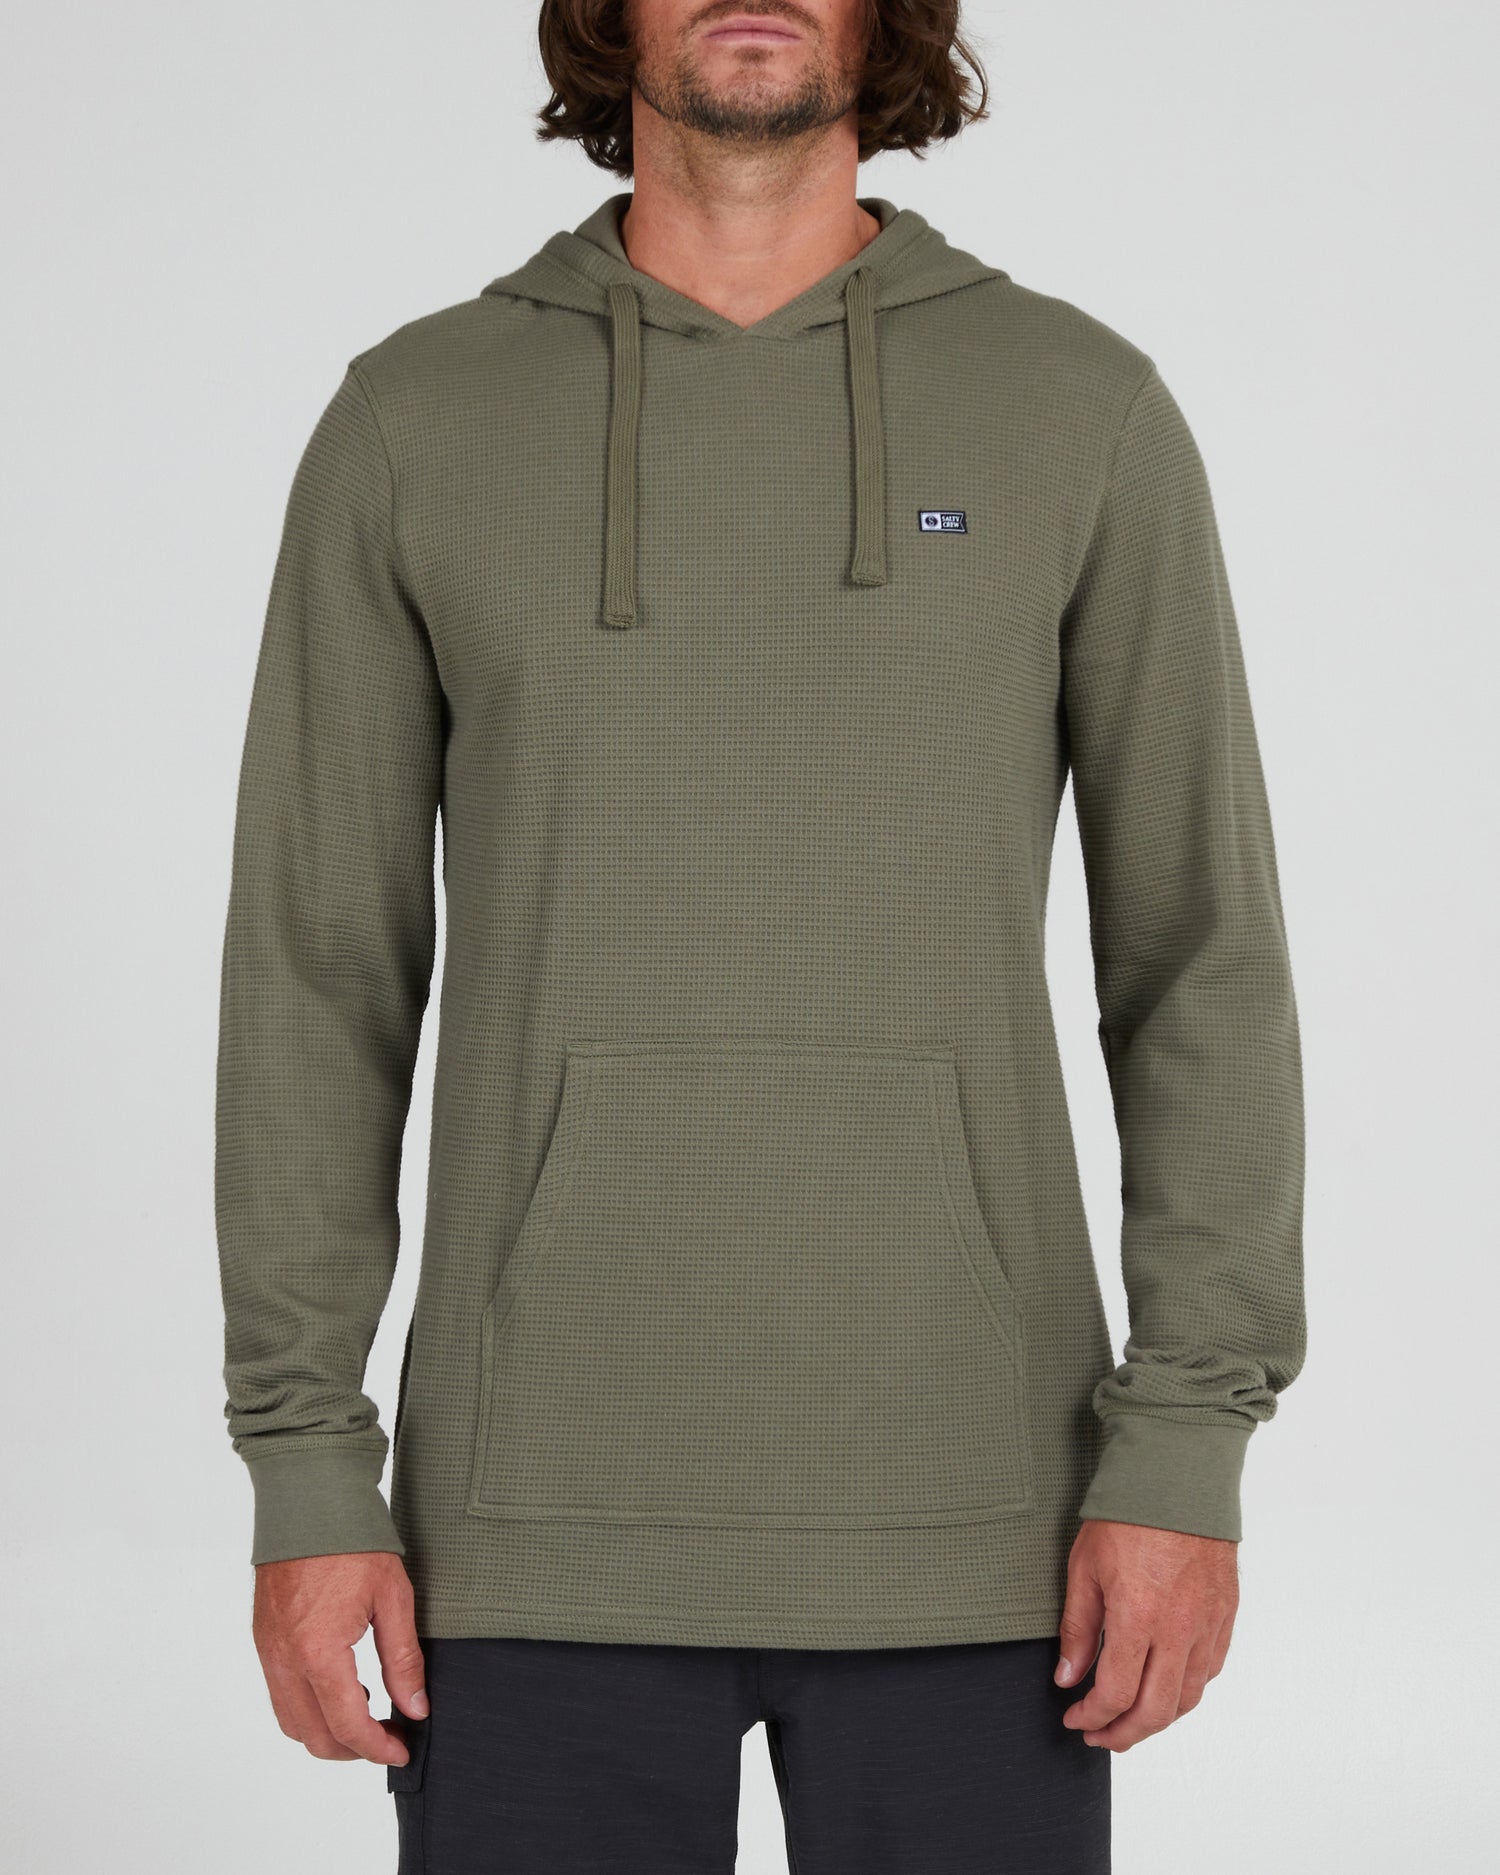 On body front of the Daybreak 2 Olive Hooded Thermal